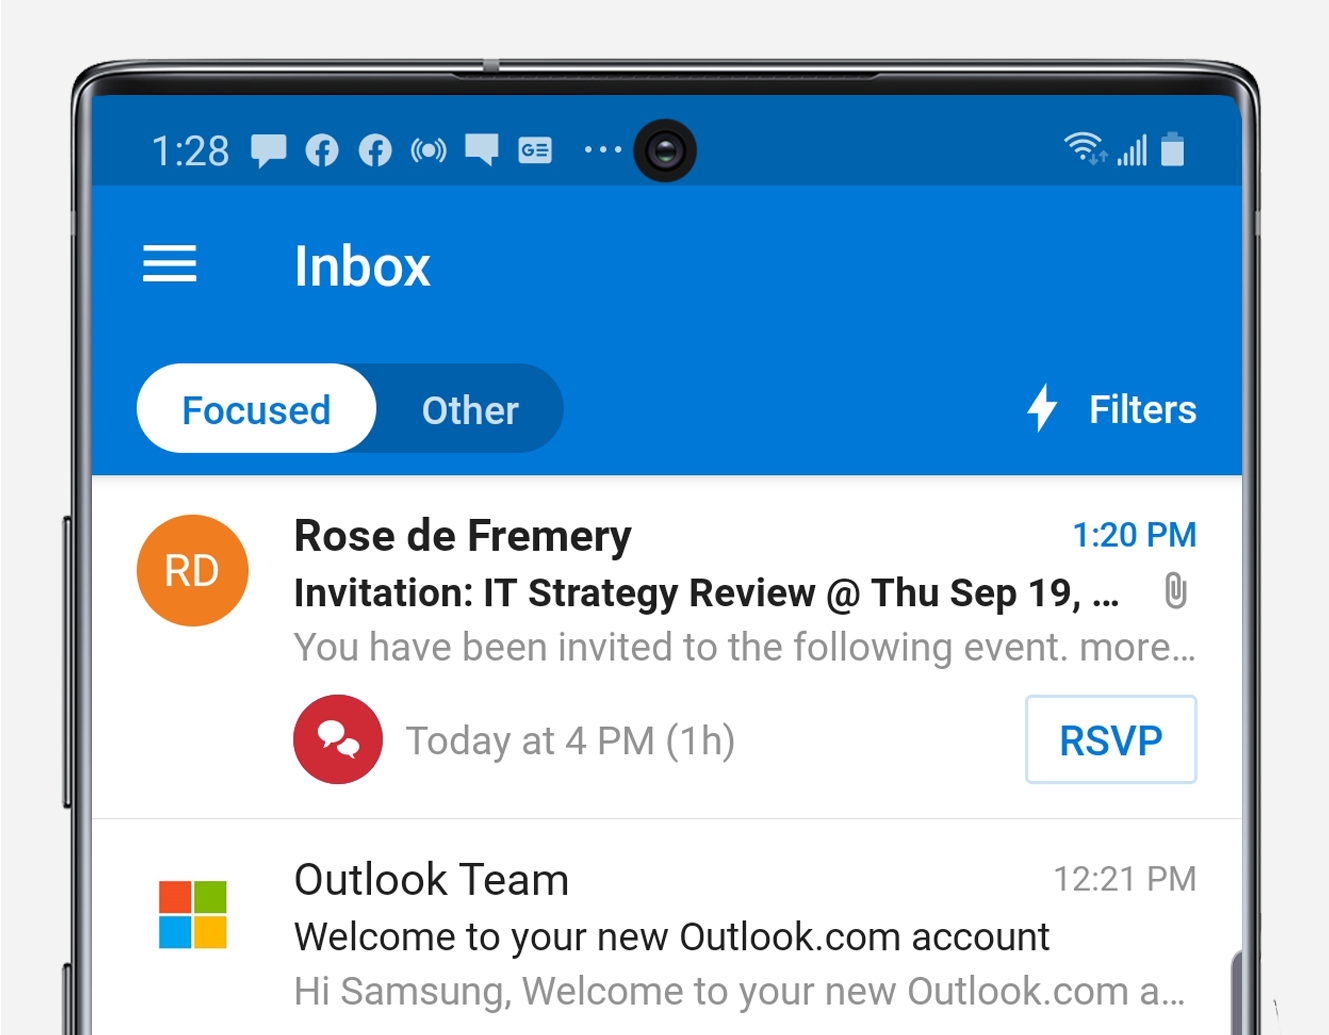 How To Manage Your Focused Inbox In Outlook For IOS